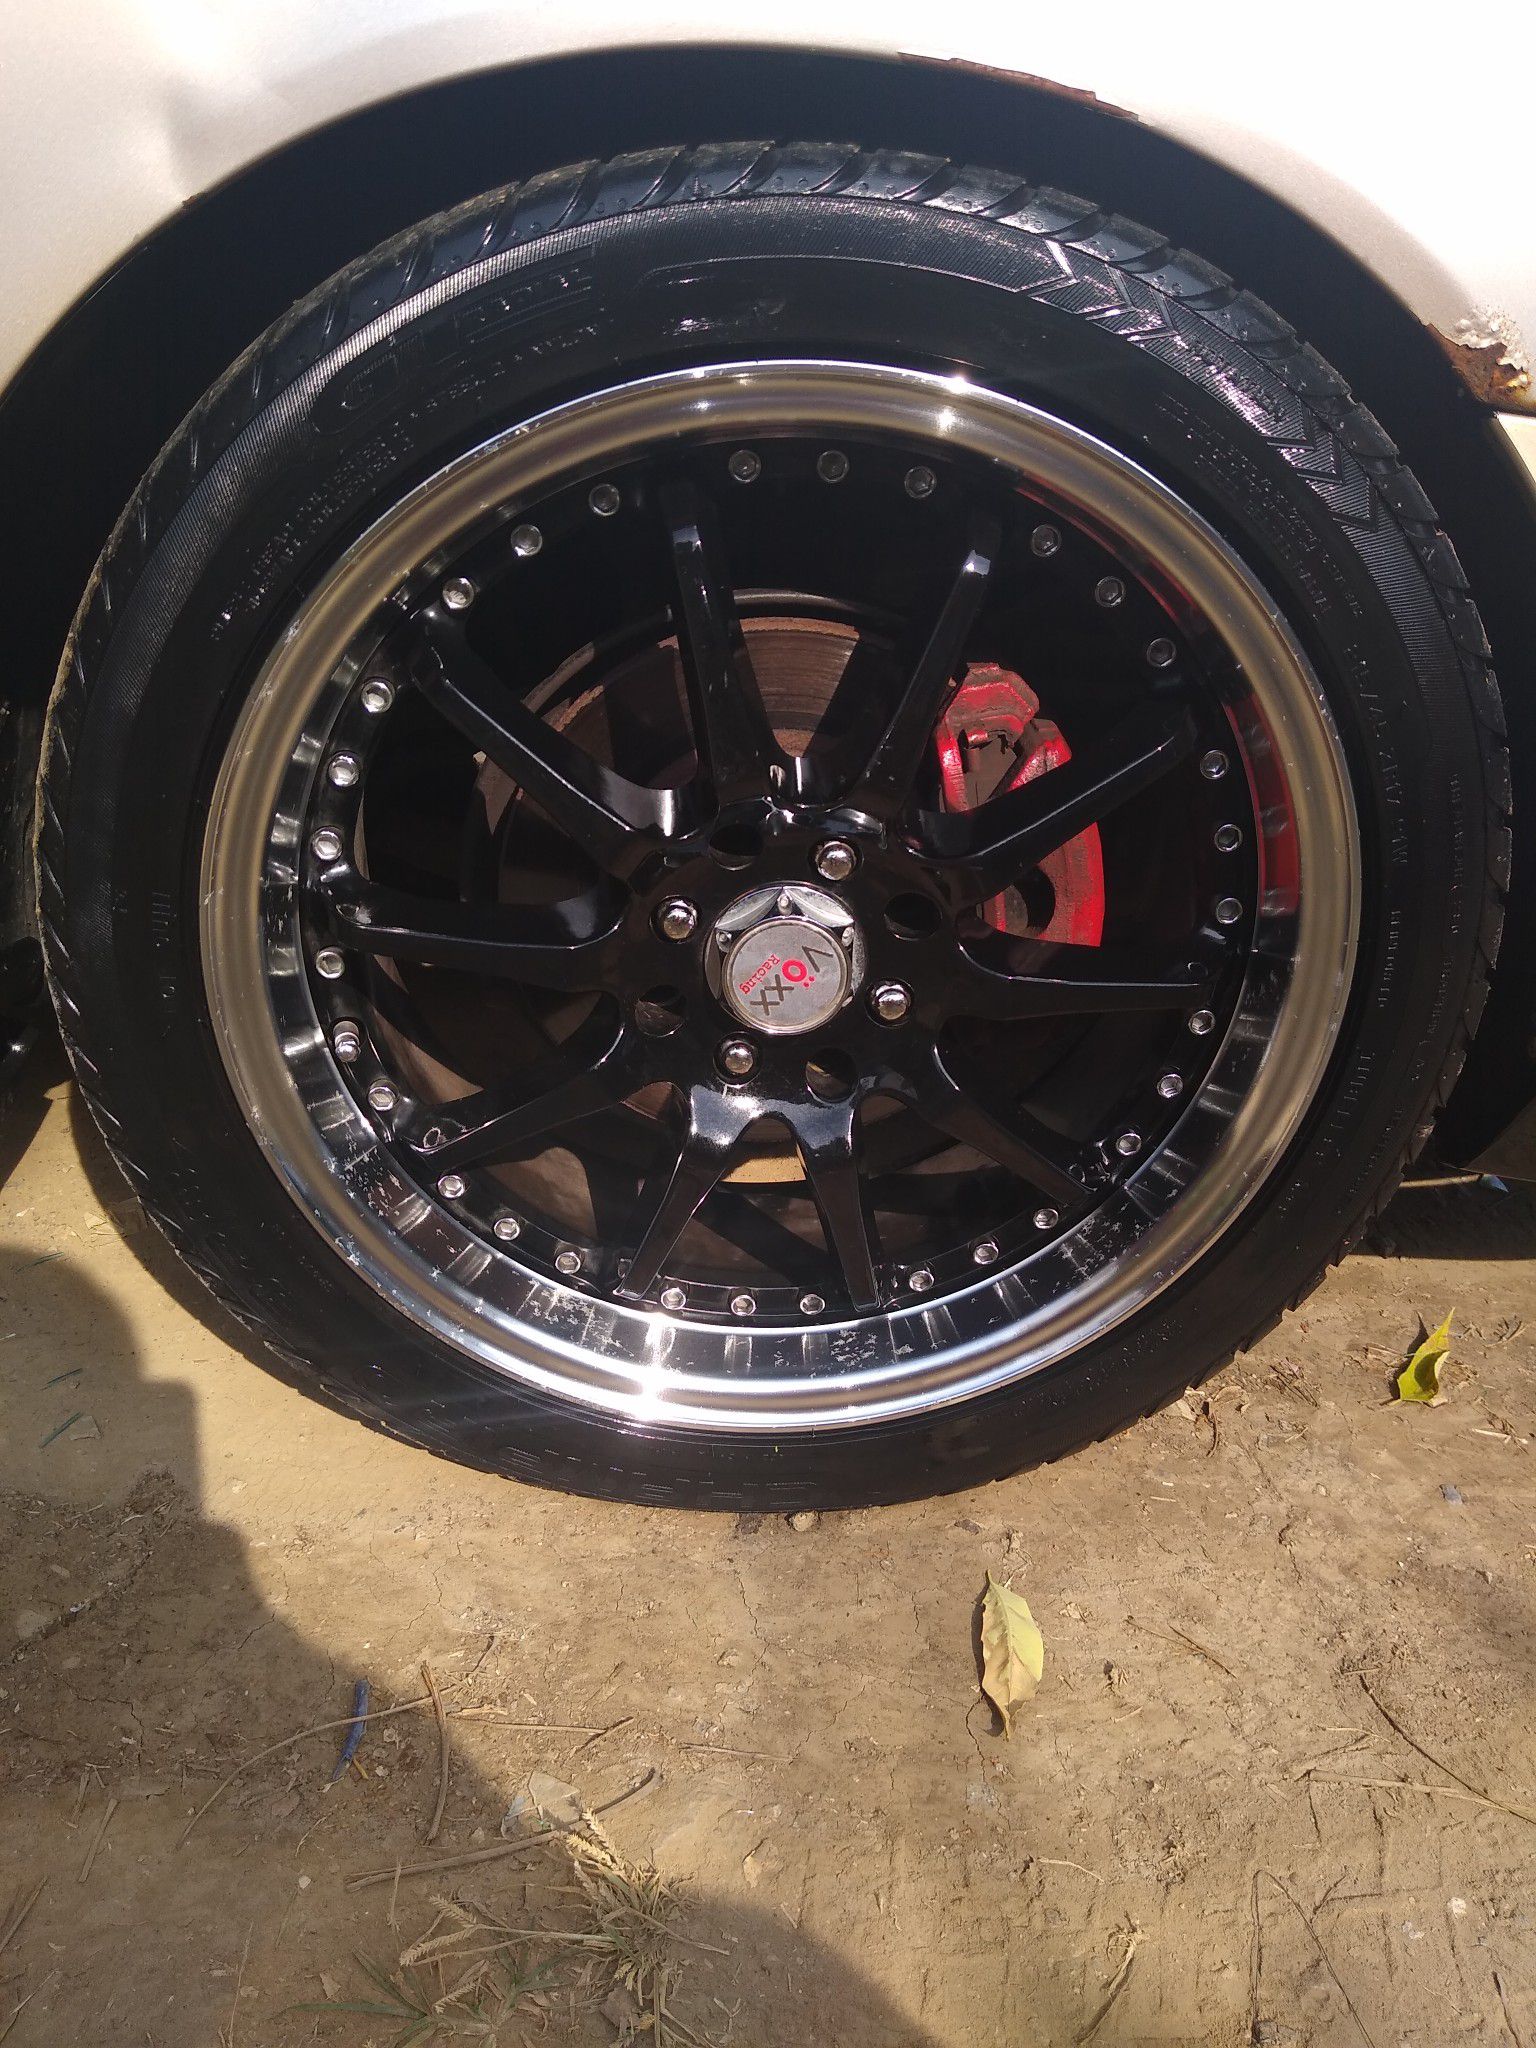 17" rims for sale or trade they are 17x7 4lugs univerlas 4x100 4x114